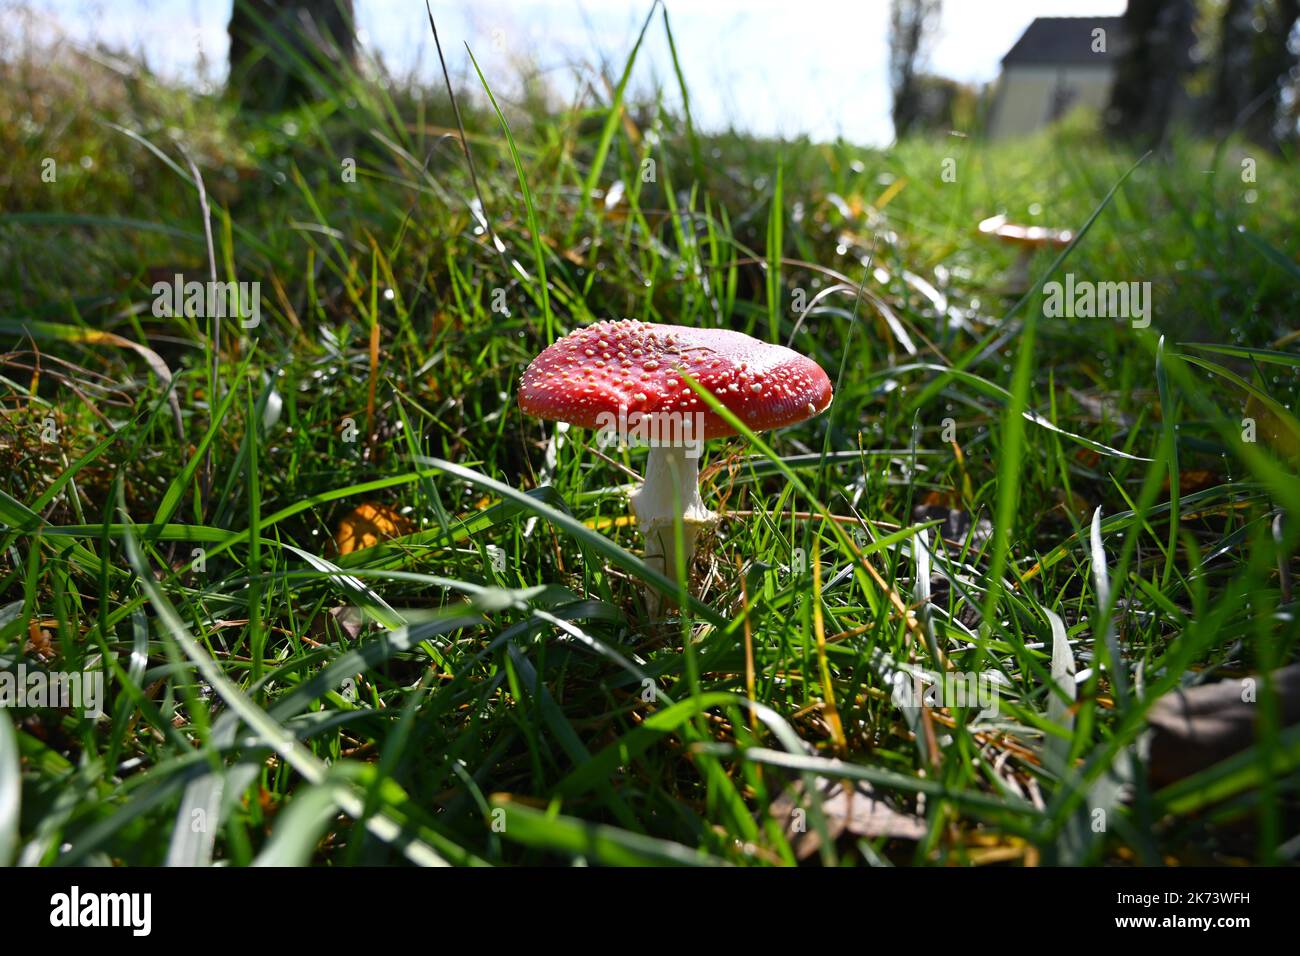 Toadstool in green grass standing in the sun Stock Photo